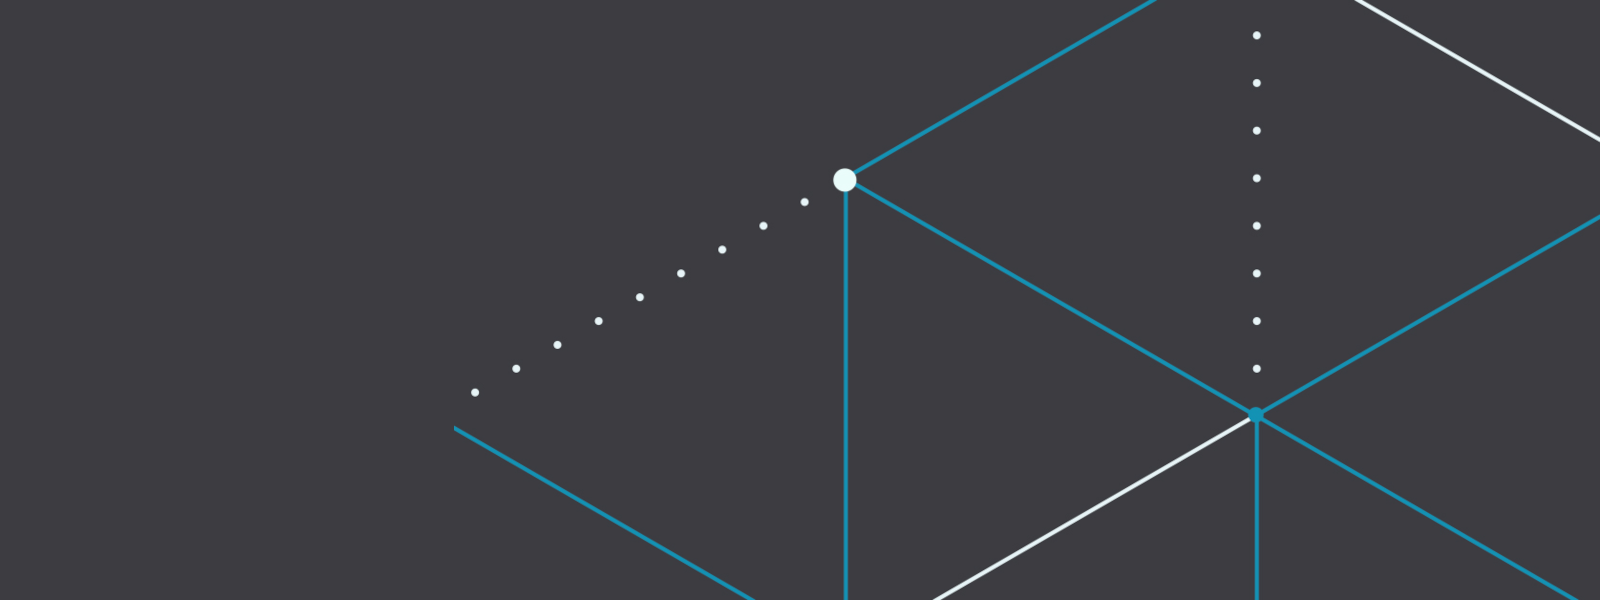 Illustration of solid and dotted lines on a dark grey background